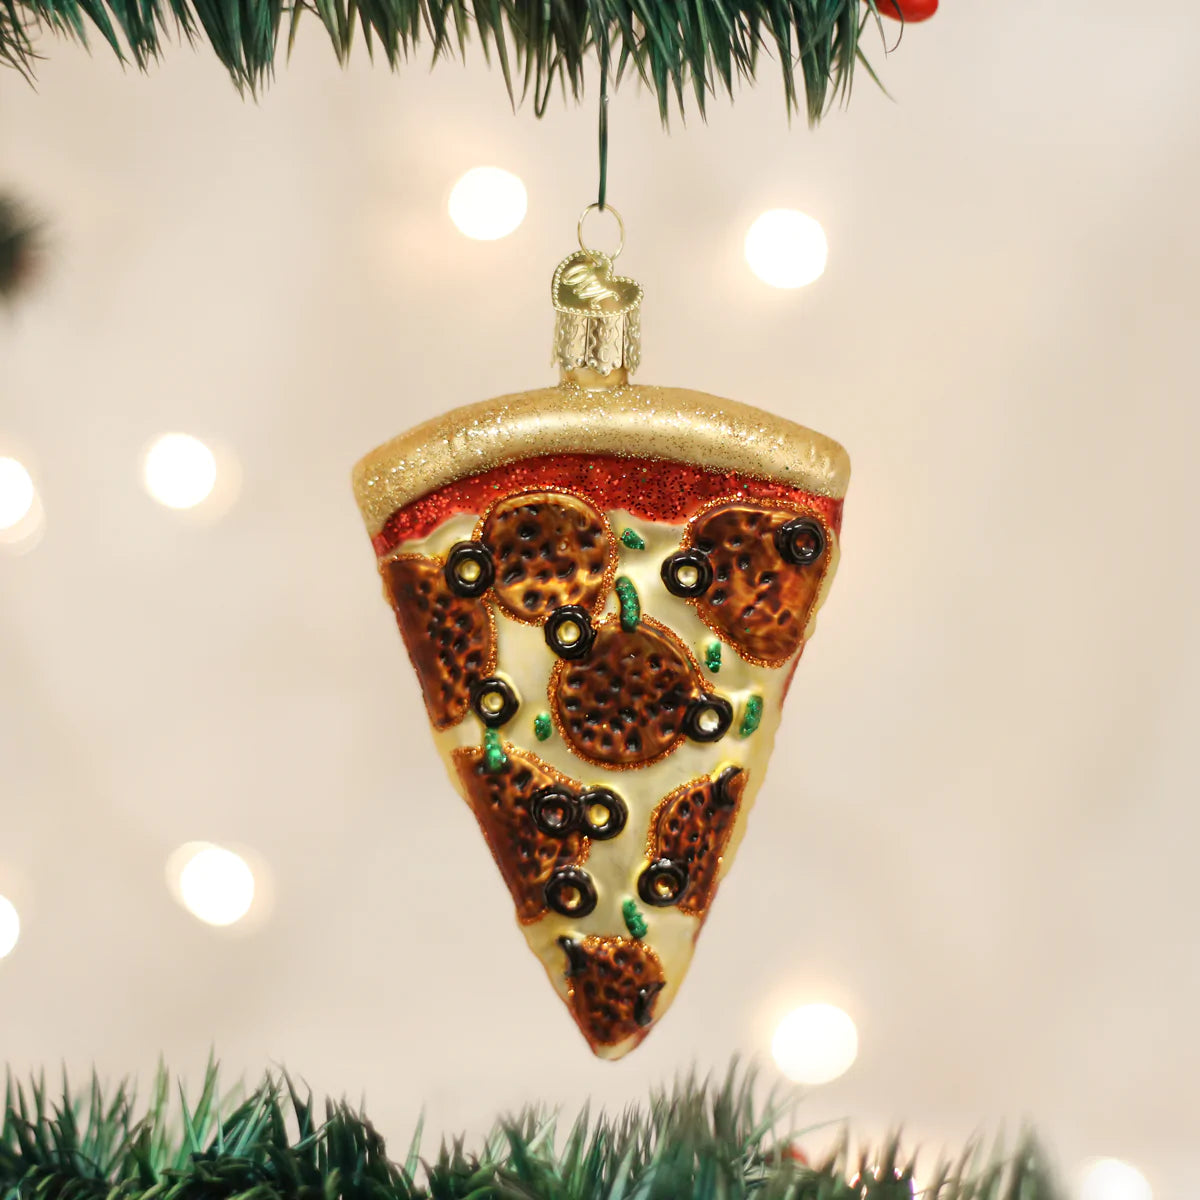 Pizza Slice Ornament  Old World Christmas   